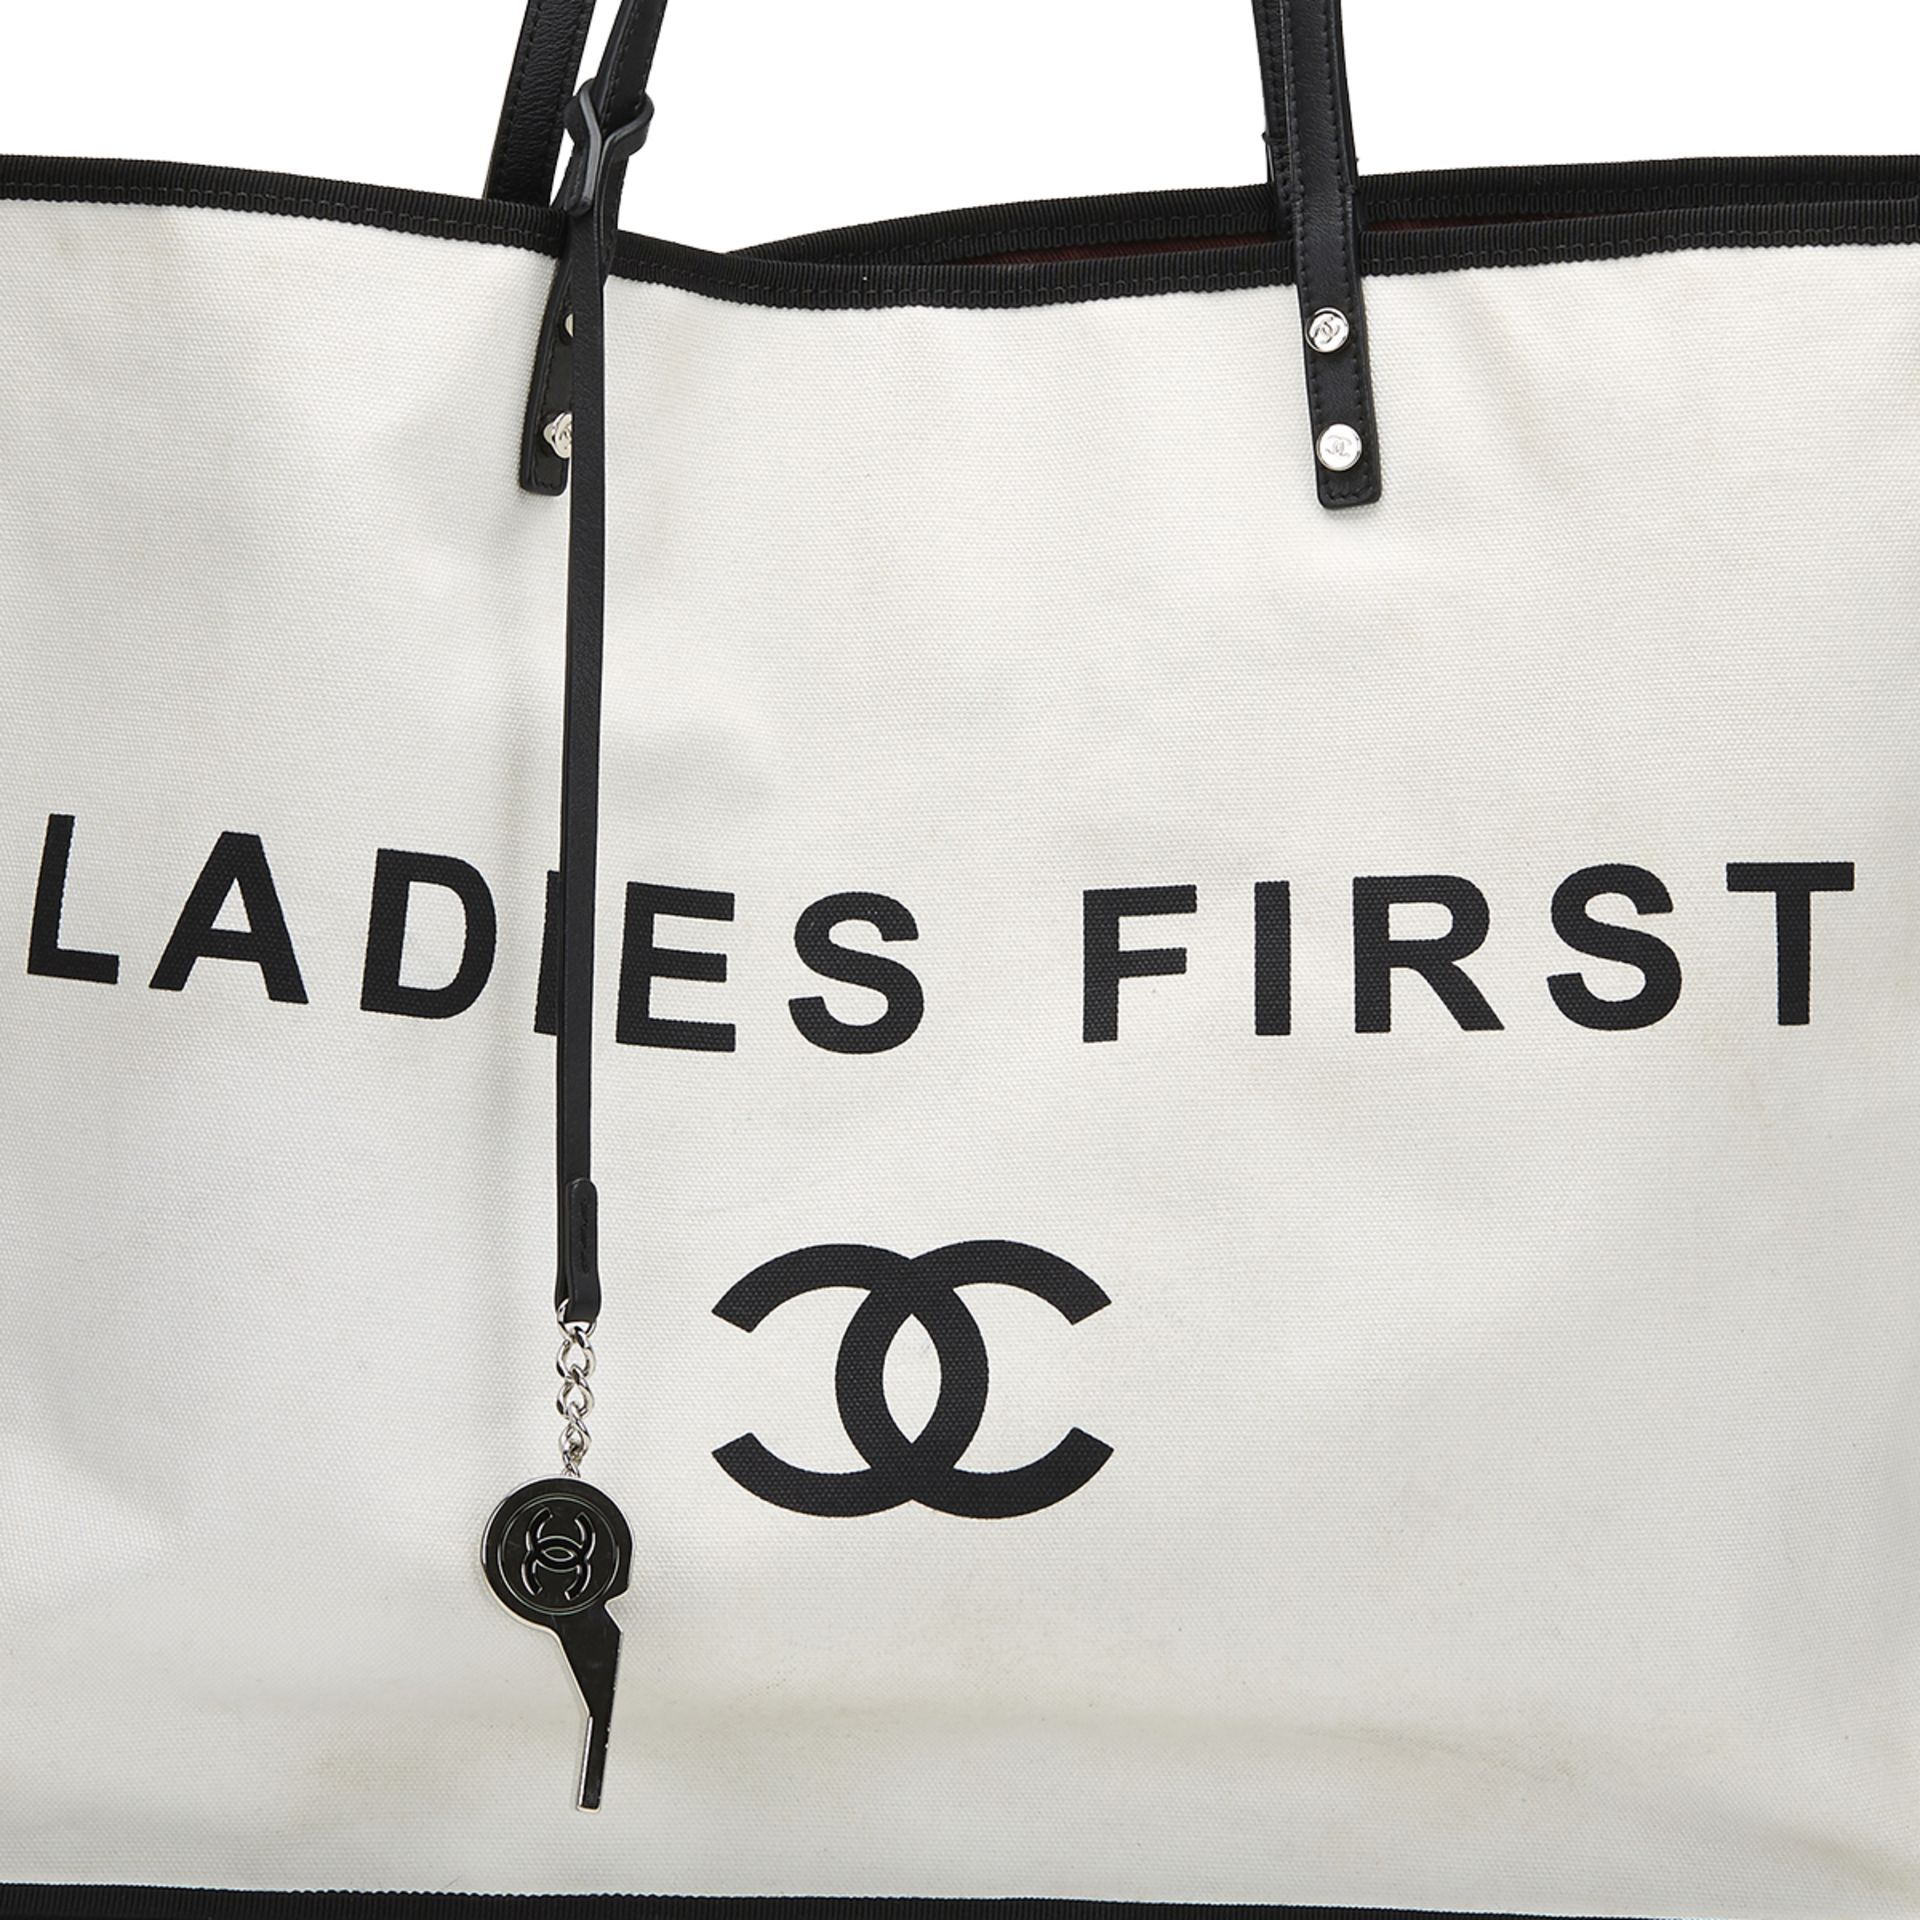 Chanel Black & White Canvas Ladies First bidper Tote - Image 7 of 9